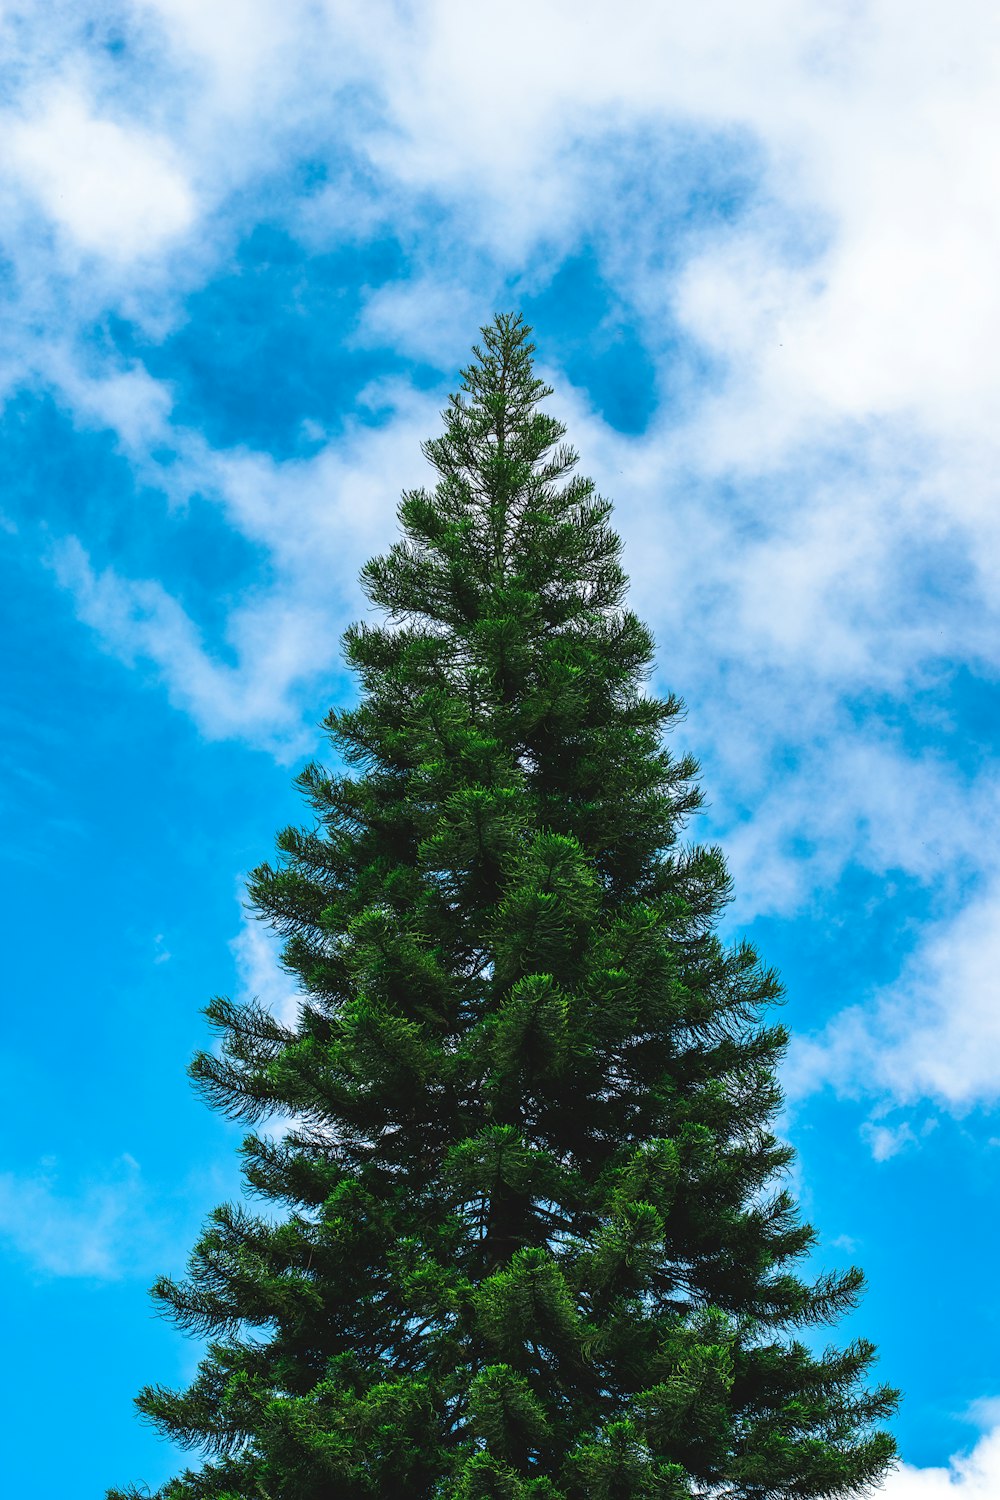 green pine tree under blue and white cloudy sky